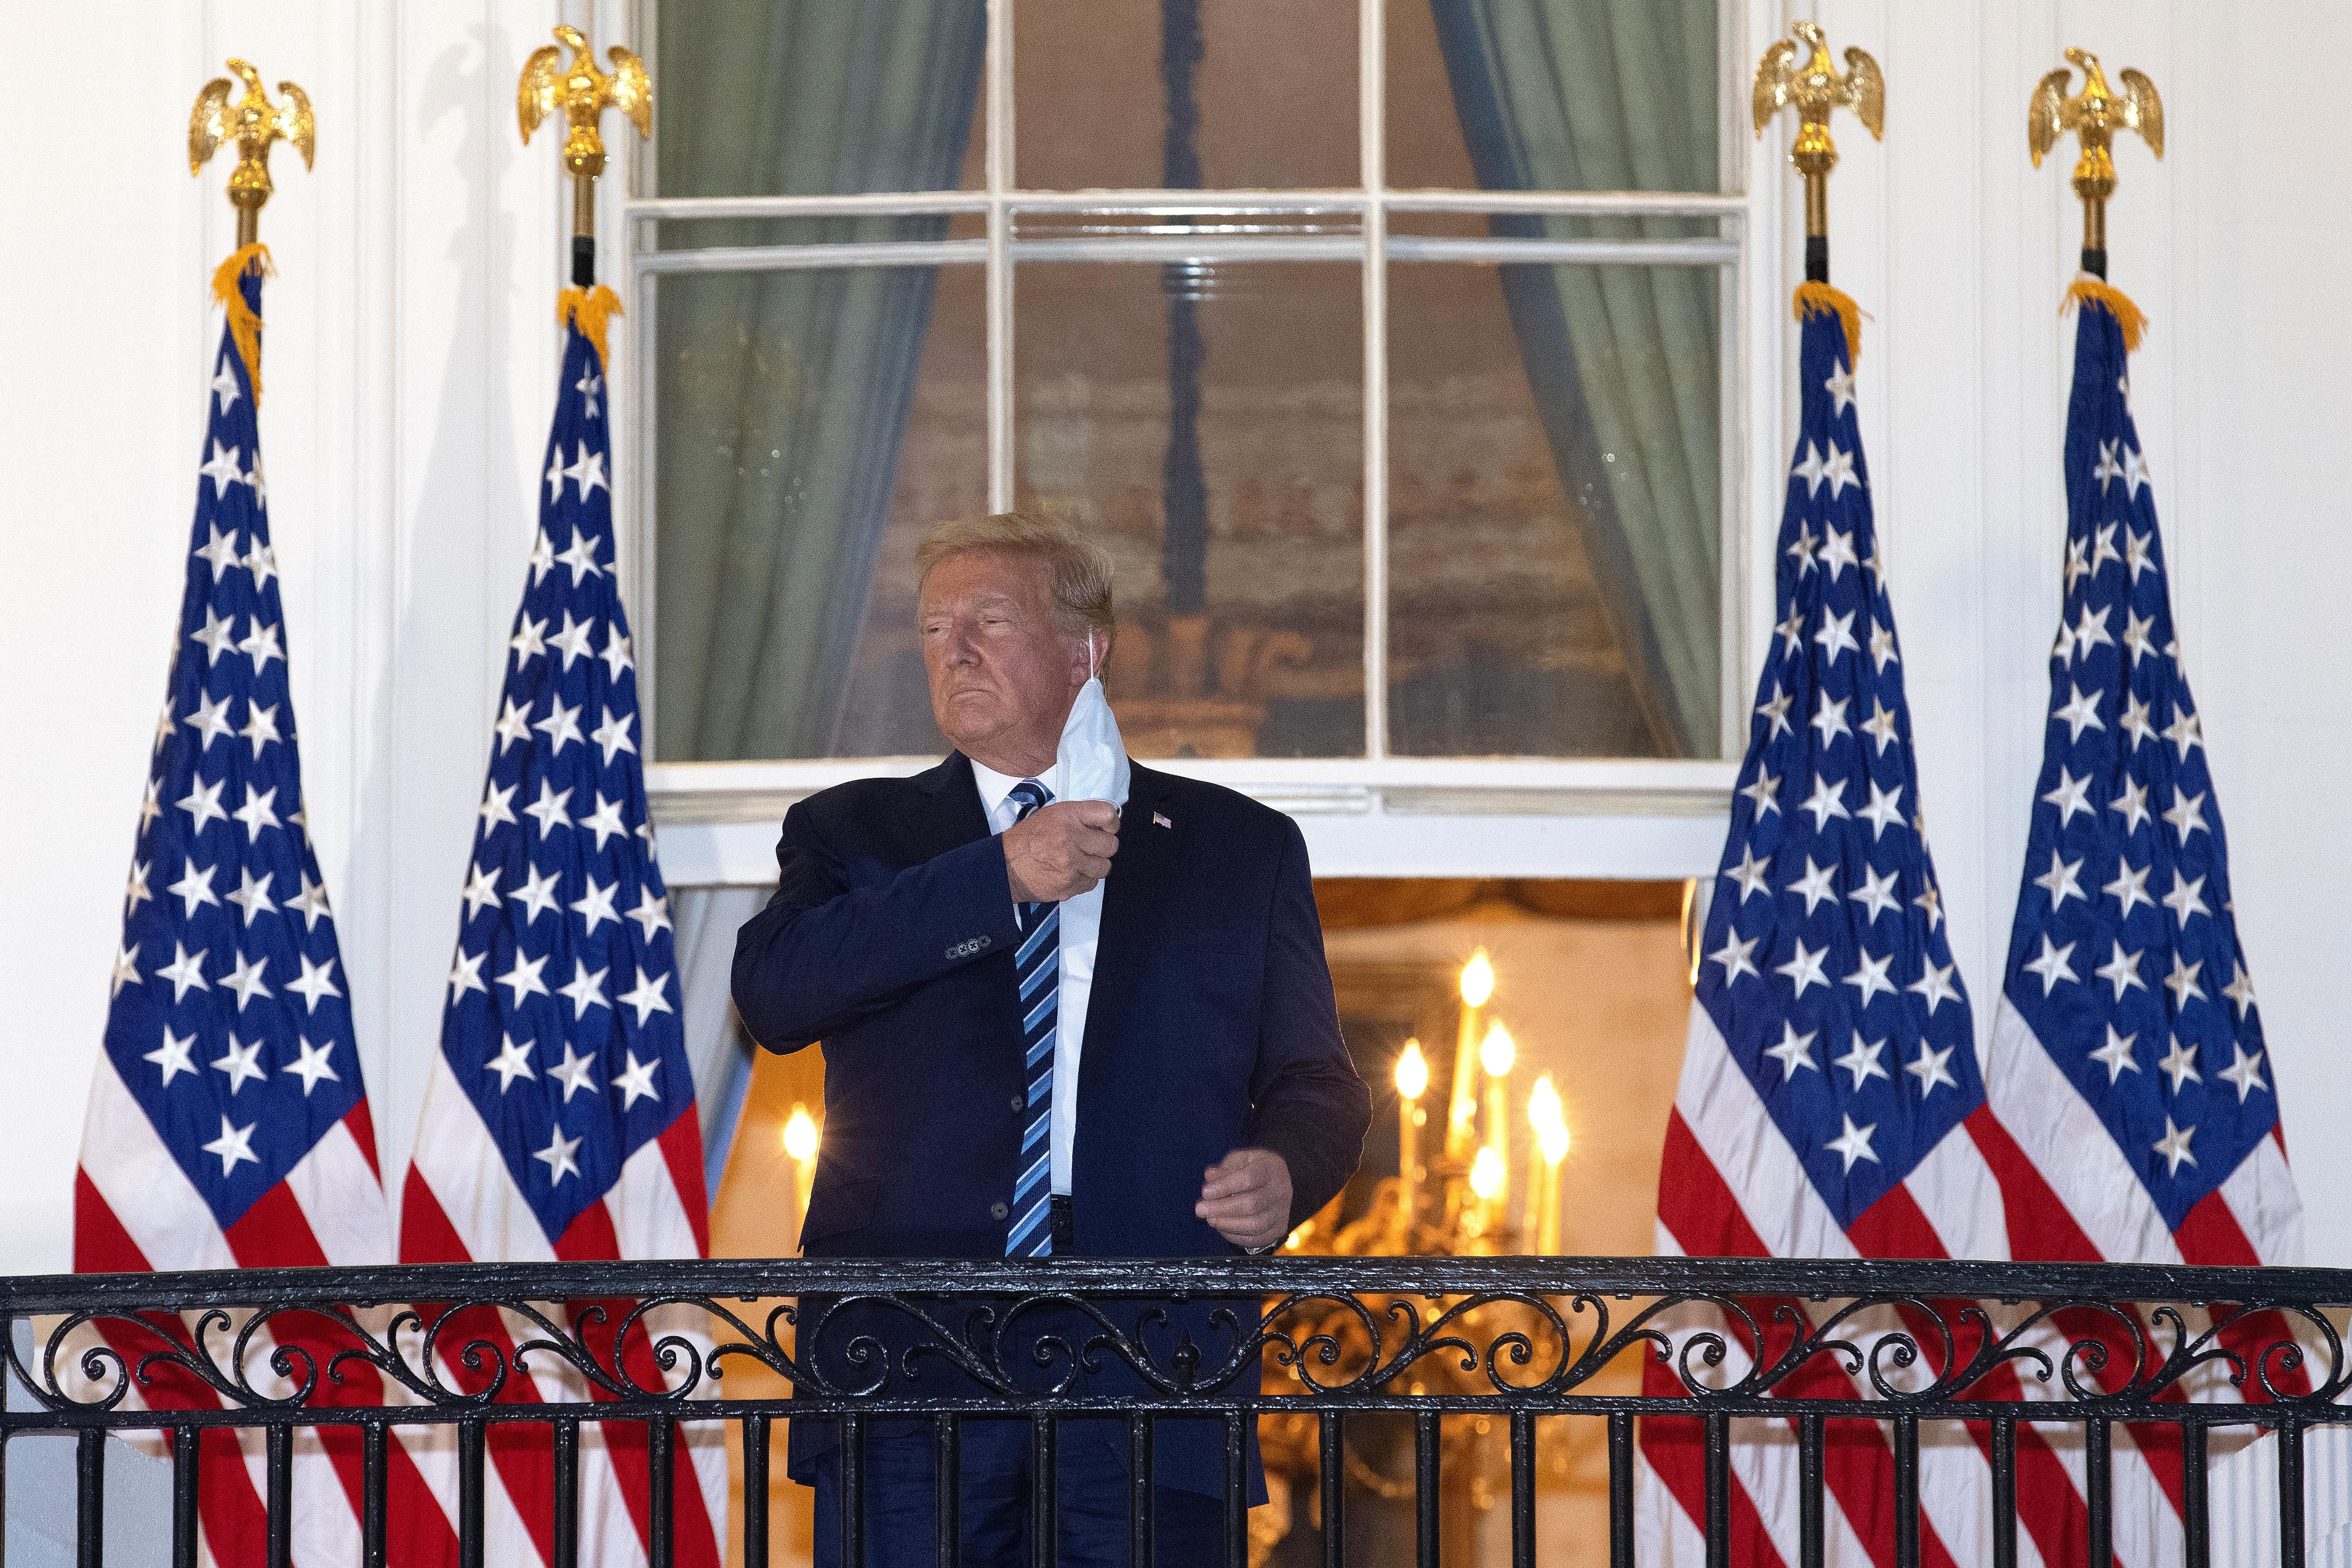 Donald Trump removes his mask while standing on a balcony with U.S. flags